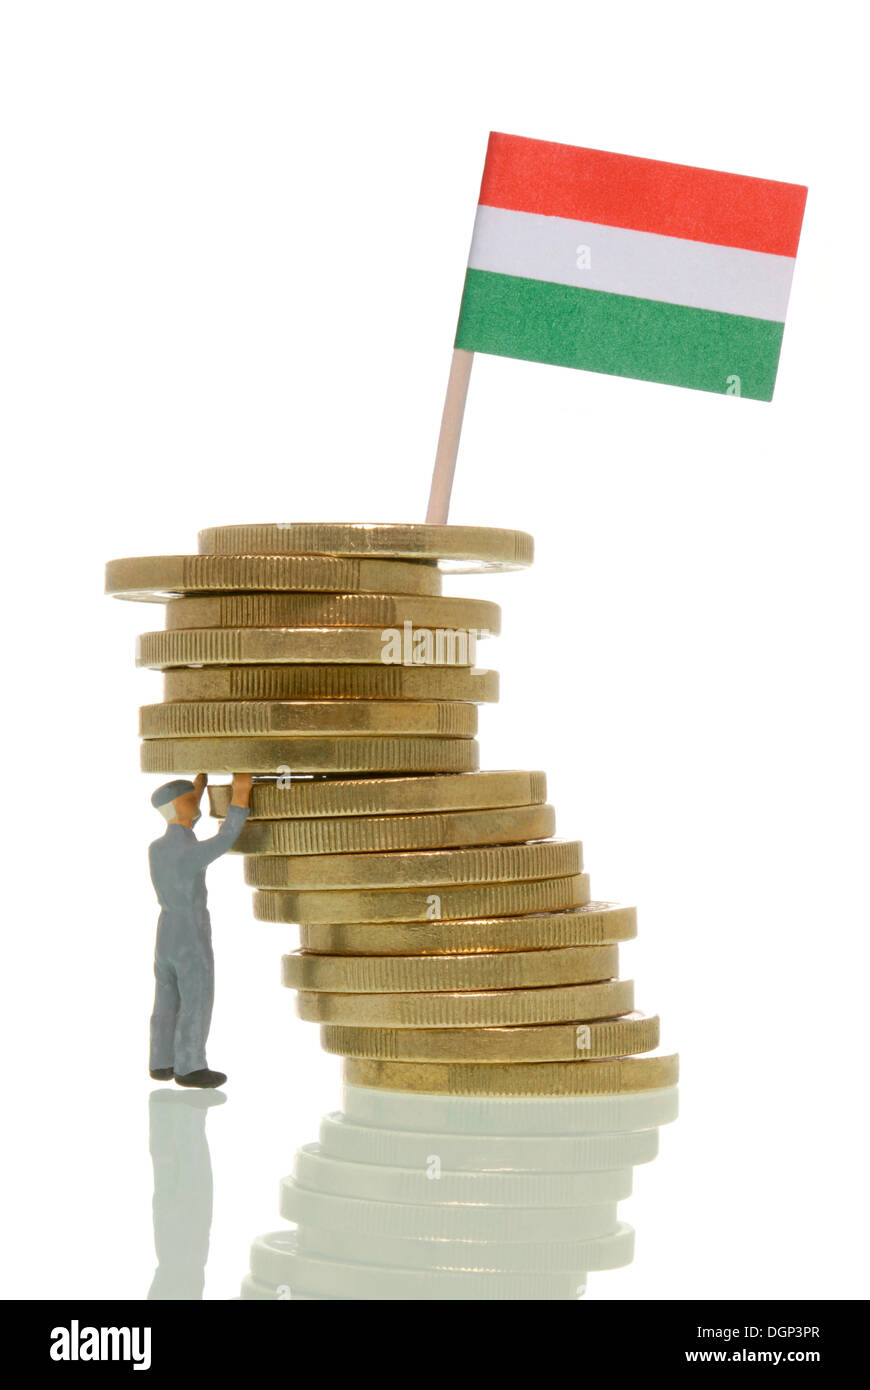 Worker figure propping up a wobbly stack of Euros with a Hungarian flag on top, symbolic image, Euro crisis impacting the Stock Photo